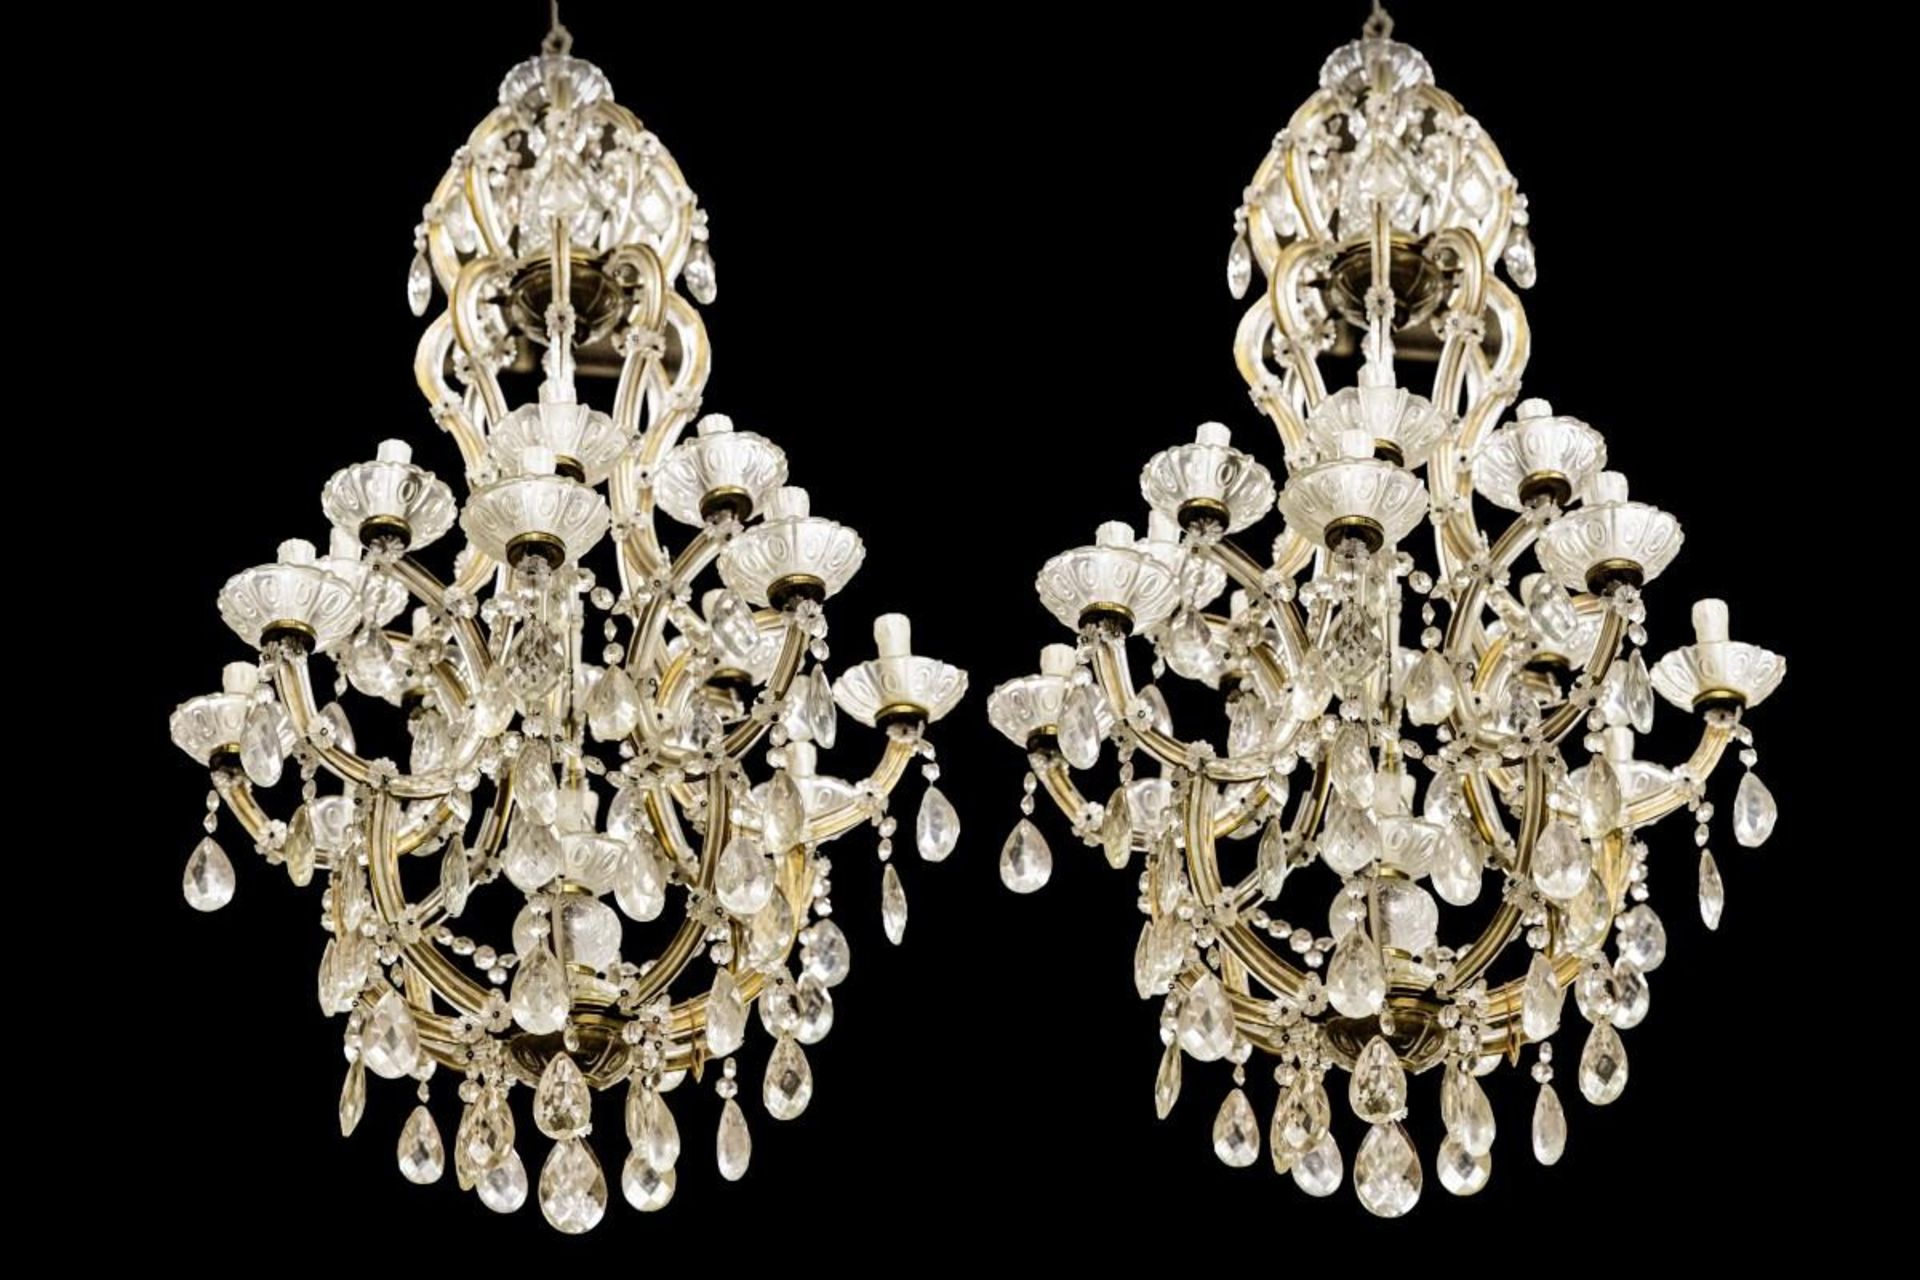 A set of (2) Louis XV-style chandeliers, France, 20th century.